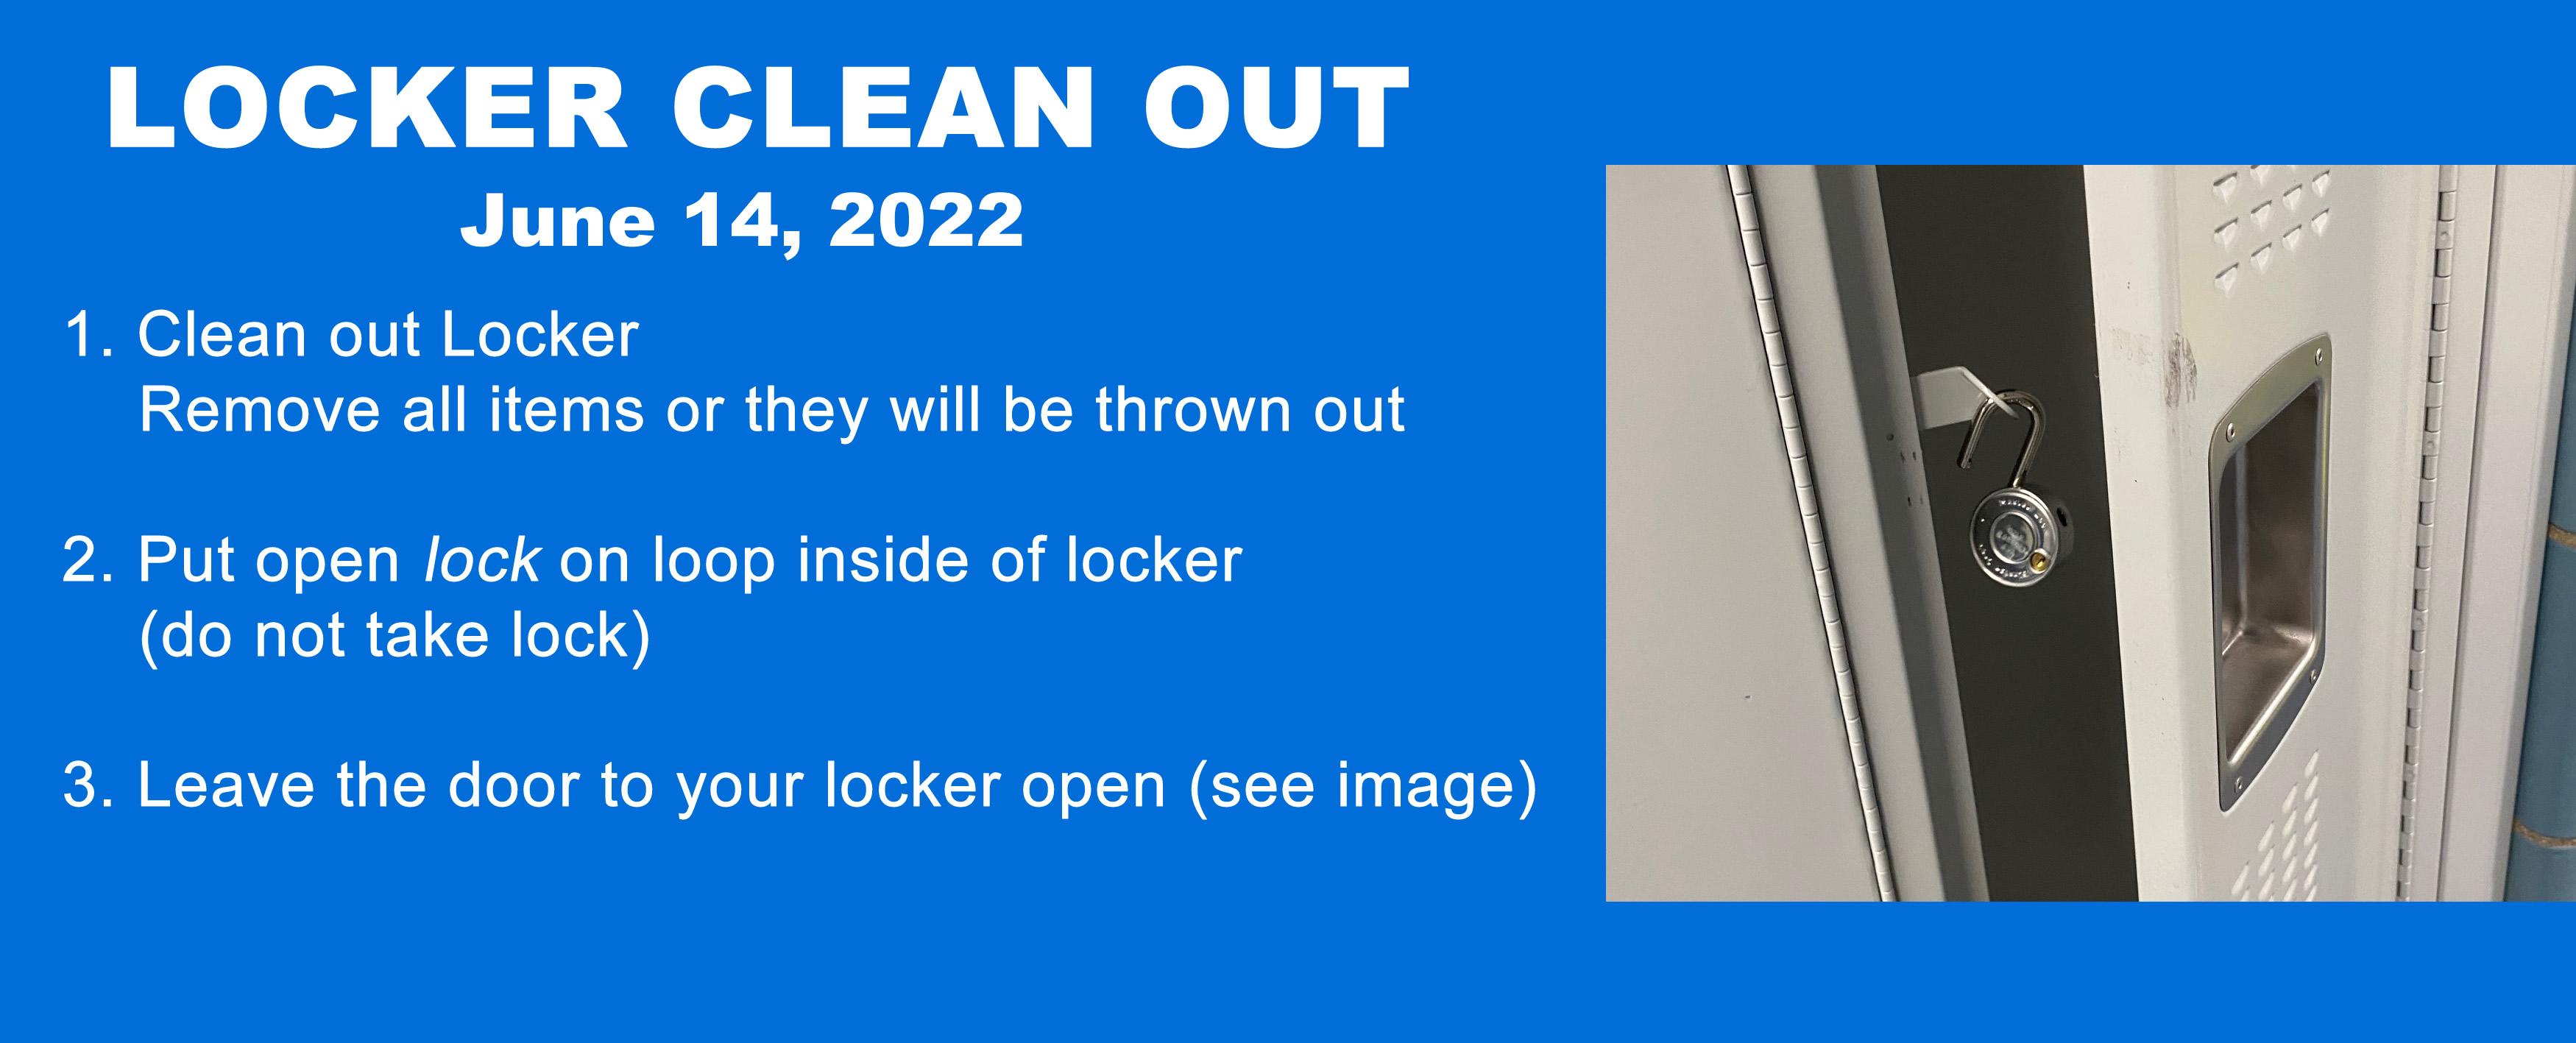 Image Locker Clean out 2022